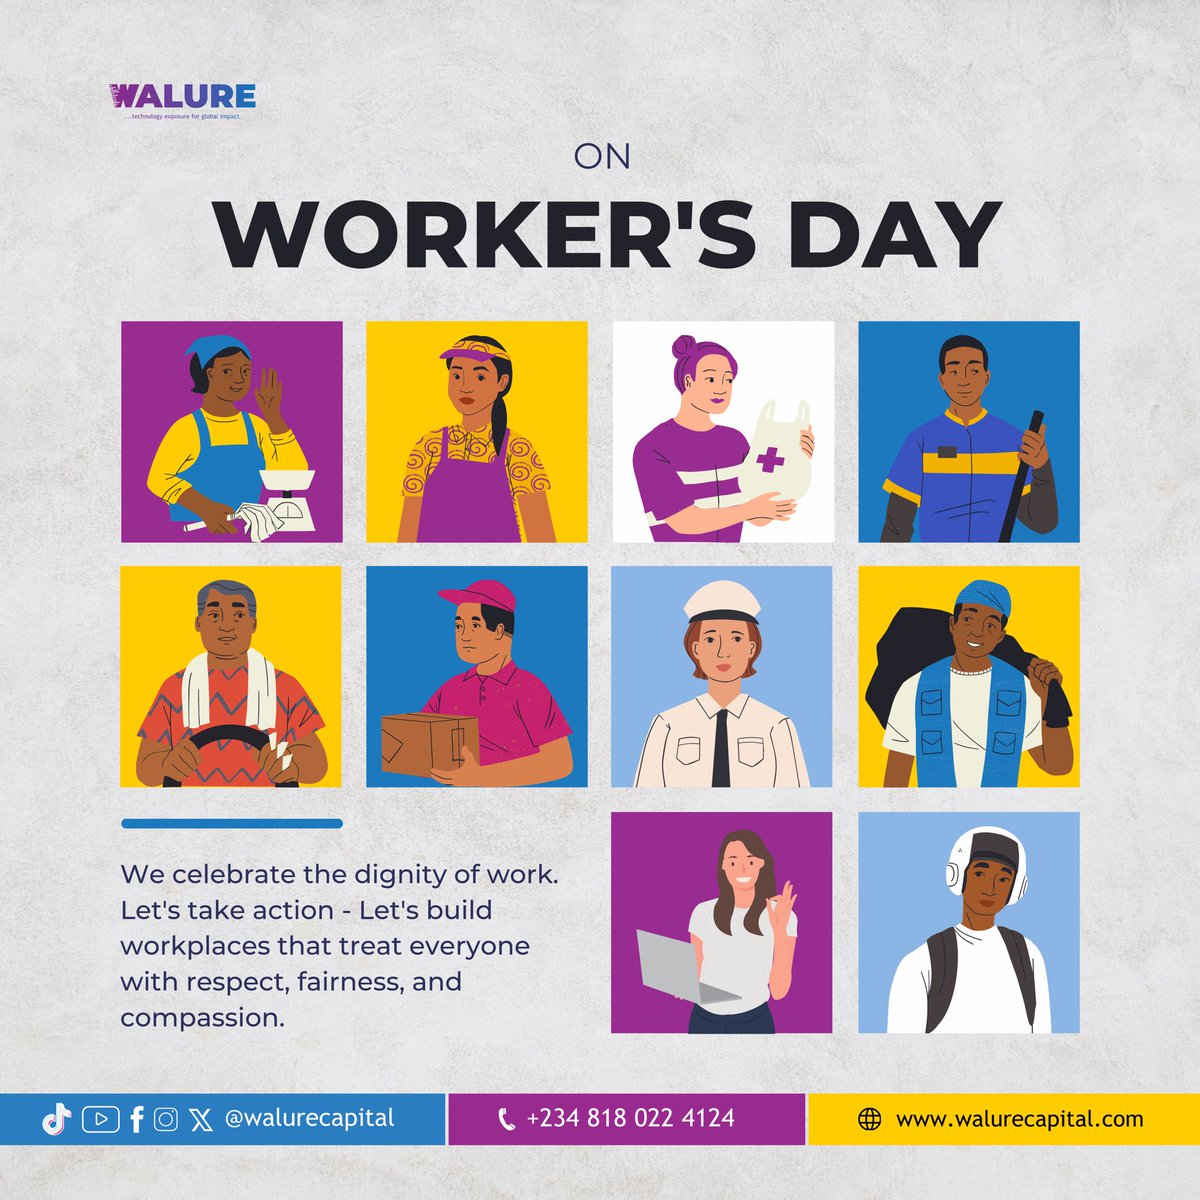 Today, we honor the heartbeat of every thriving society: the hardworking souls who build dreams with sweat and dedication. Happy Workers' Day!.

#mayday
#walurecapital
#WorkersDay 
#May1st